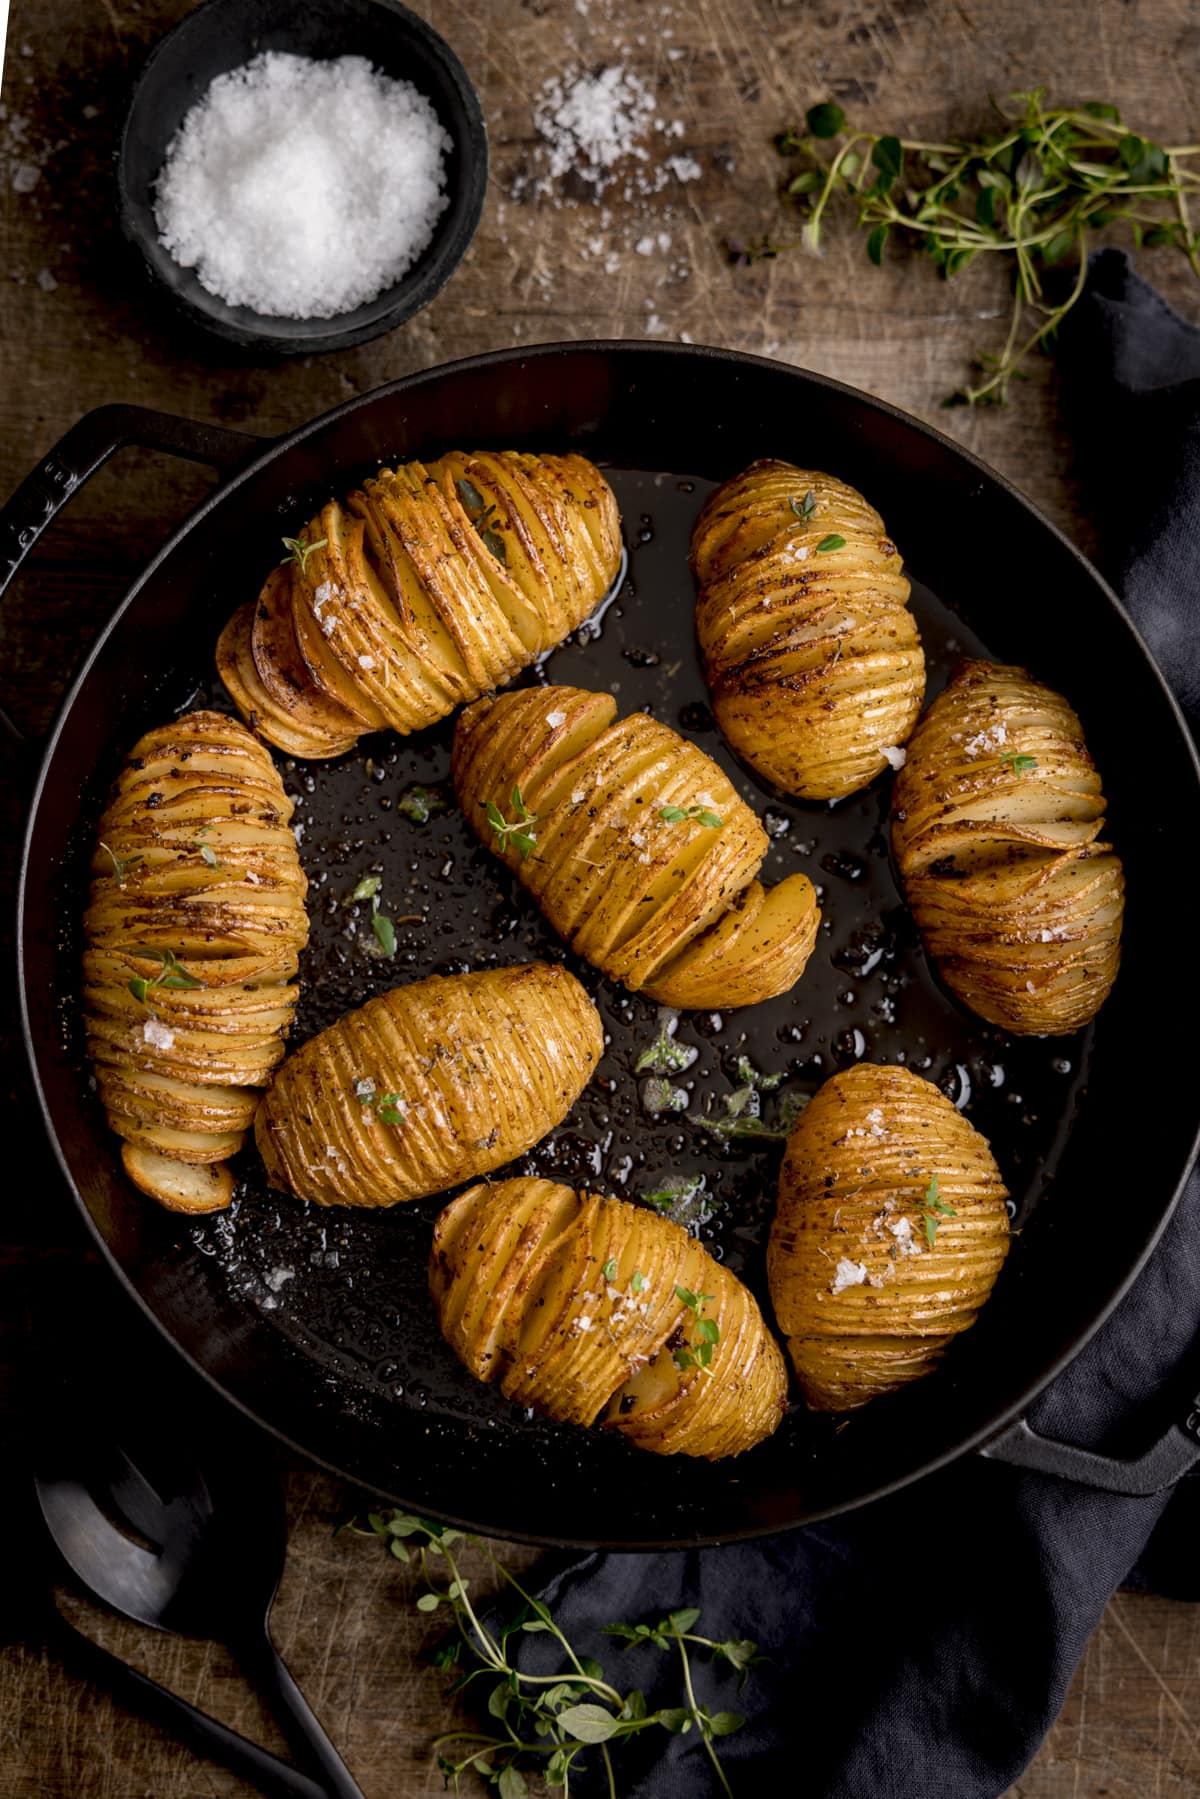 Top view of Hasselback potatoes in a dark cast iron skillet, garnished with fresh thyme leaves and Maldon salt.  The pan is on a wooden table and around the pan is a small bowl of Maldon salt and some thyme leaves.